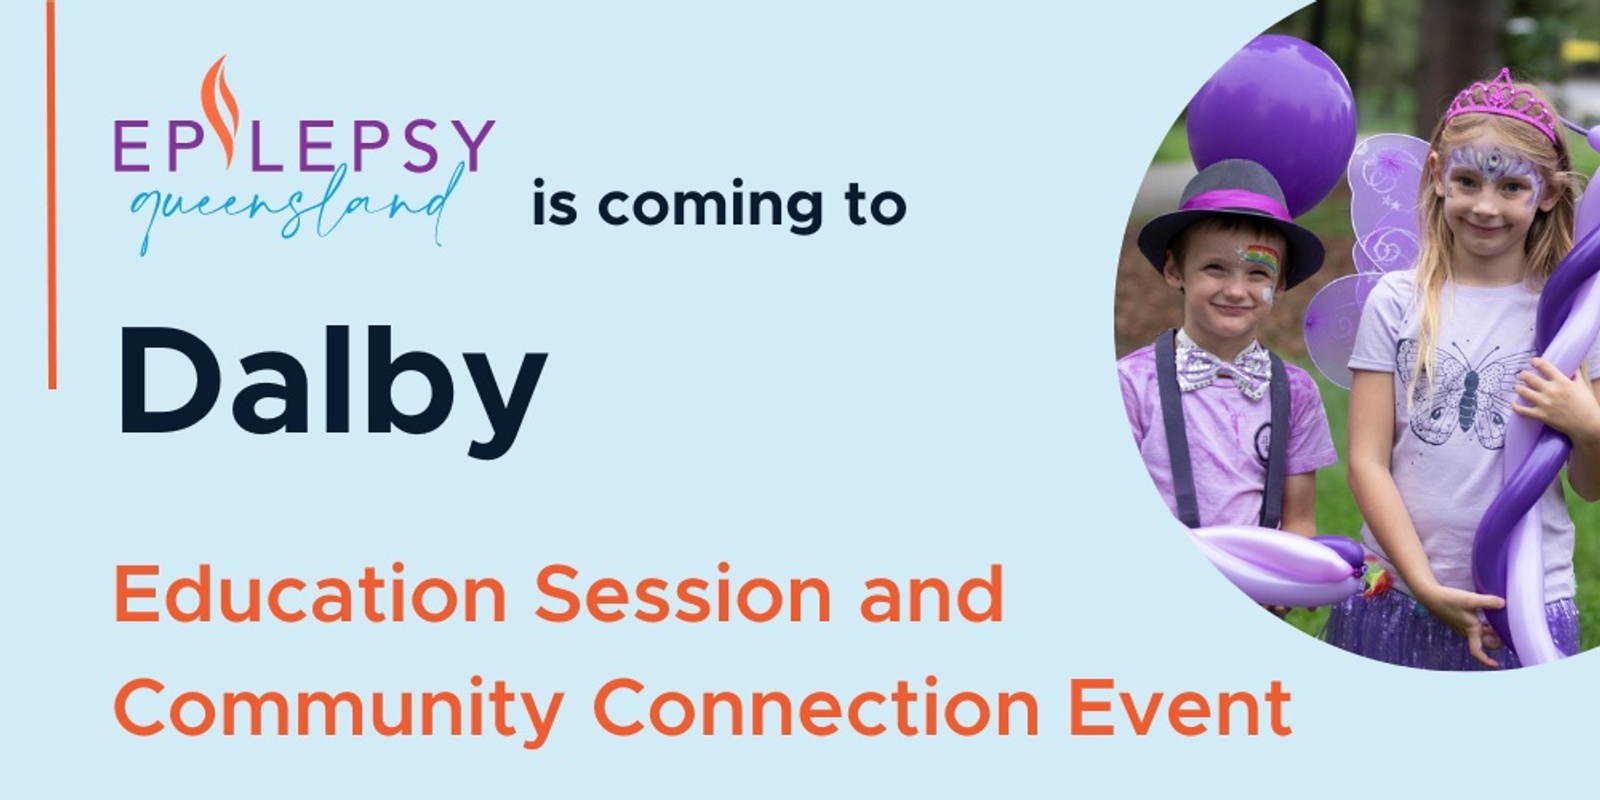 Banner image for Community Connection Dalby